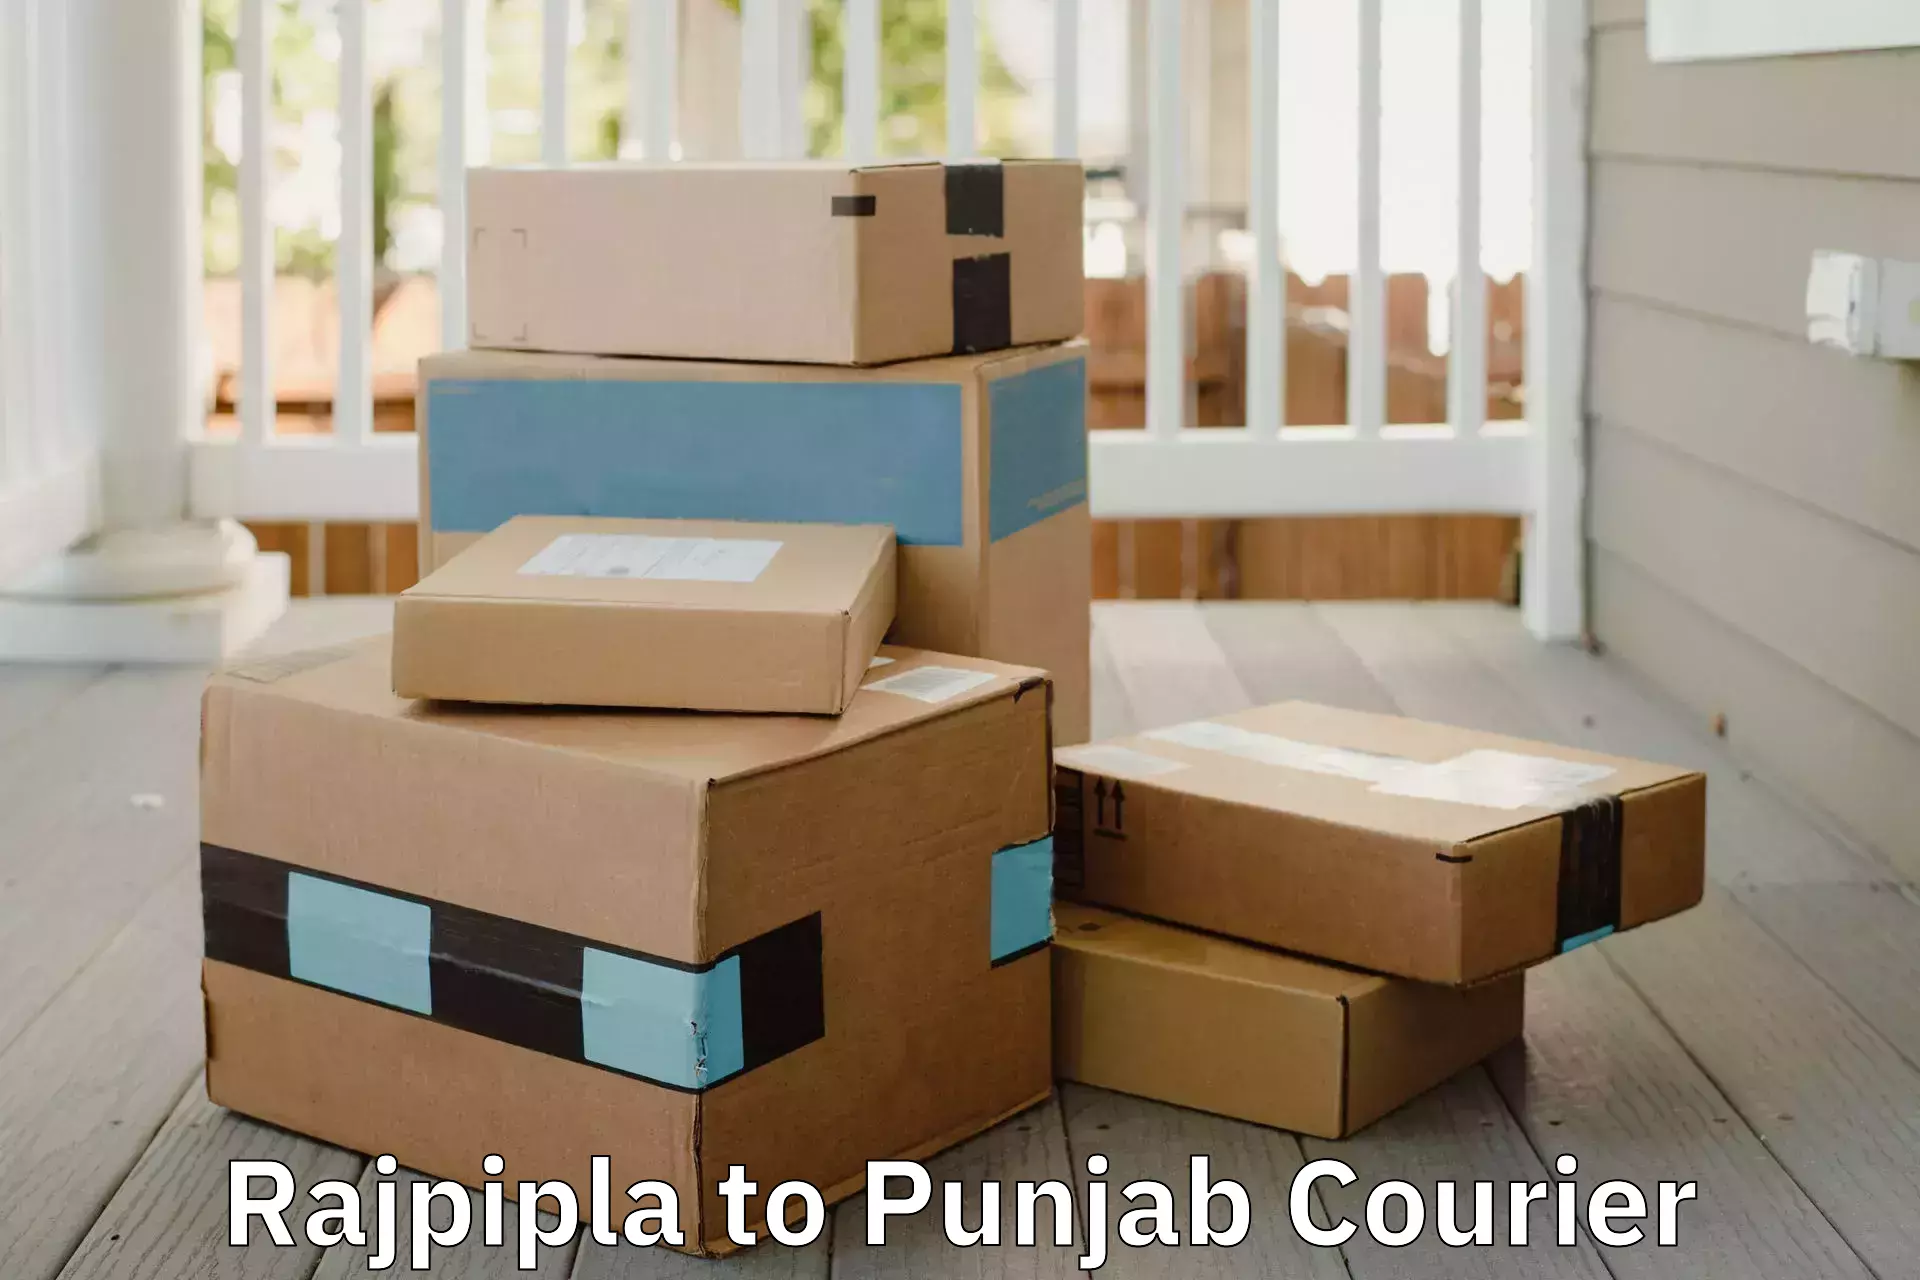 Quality relocation assistance in Rajpipla to Talwandi Sabo